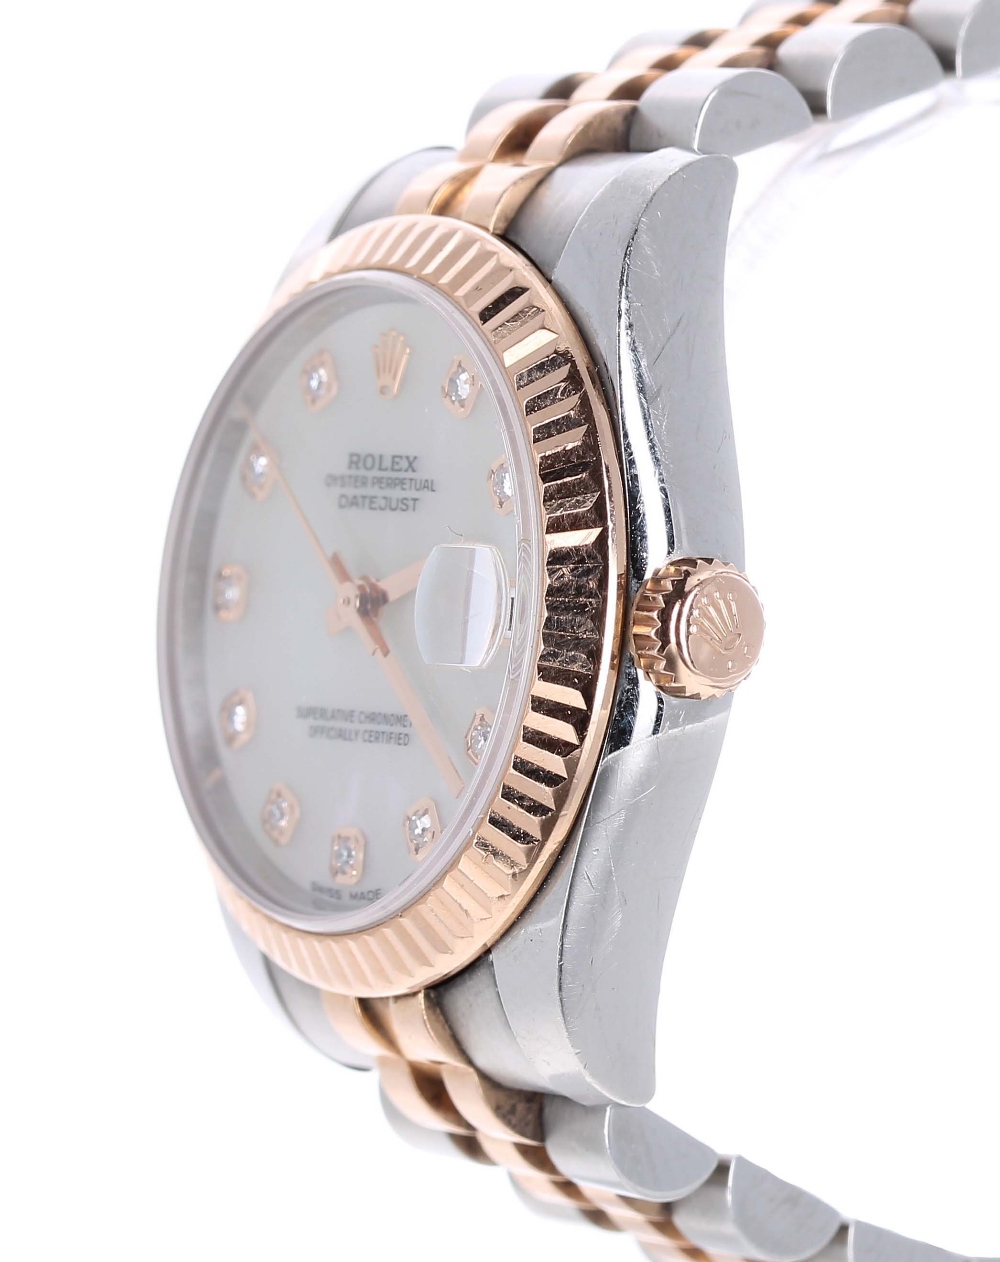 Rolex Oyster Perpetual Datejust 31 Rolesor gold and stainless steel mid-size bracelet watch, ref. - Image 2 of 3